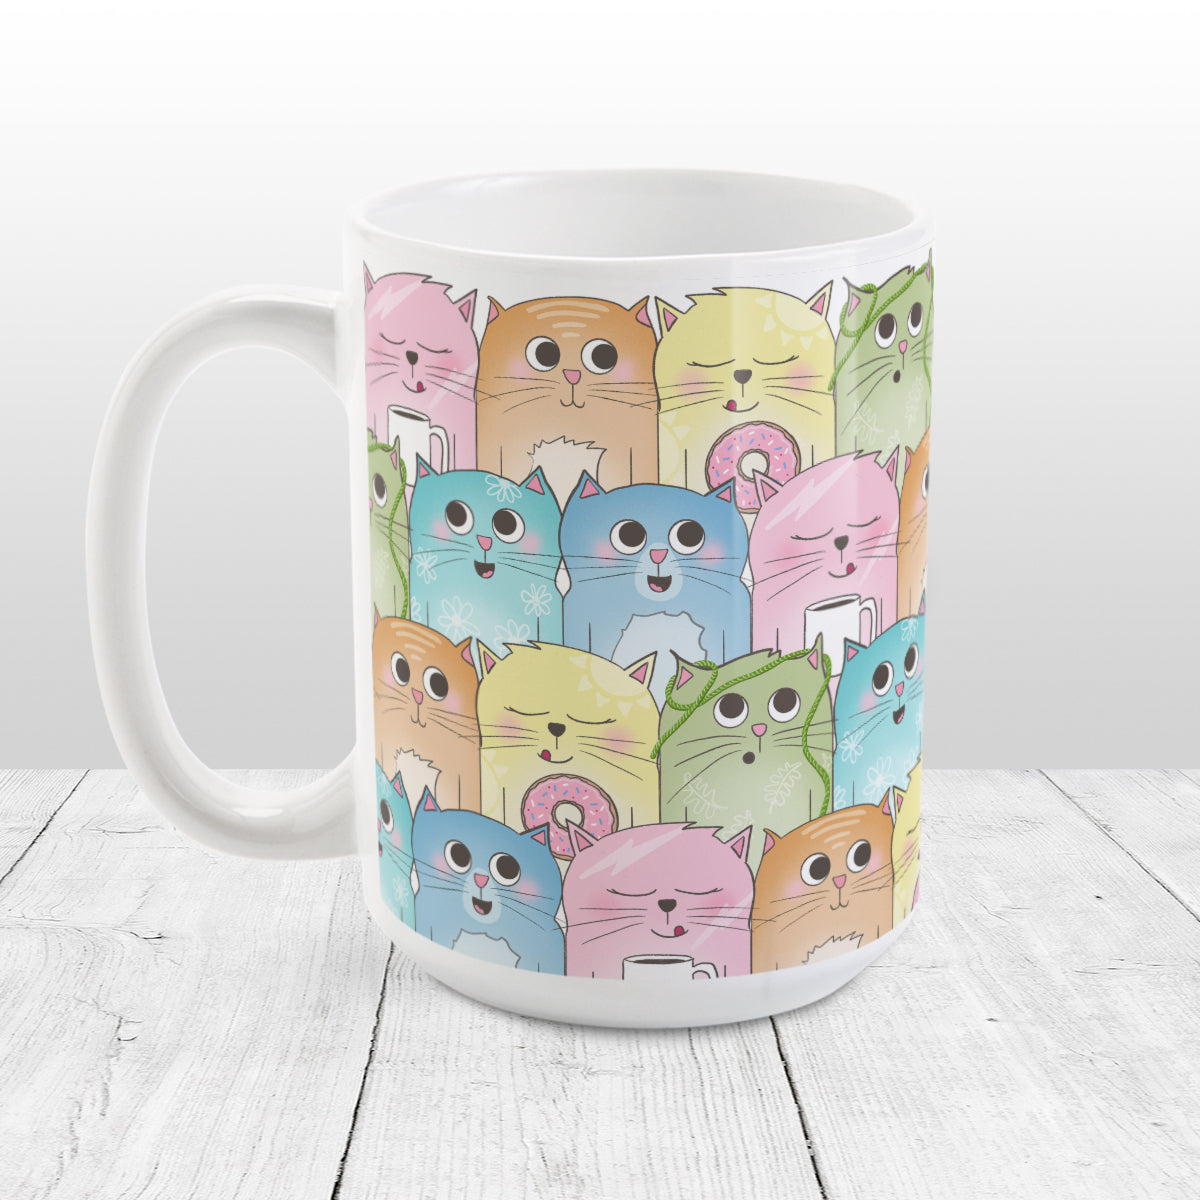 Colorful Cat Stack Pattern Mug (15oz) at Amy's Coffee Mugs. Cute cats mug with an illustrated pattern of different colorful cats (in pink, orange, yellow, green, turquoise, and blue) with different fun expressions, with yarn, coffee, and donuts. This stacked pattern of cats wraps around the ceramic mug to the handle.